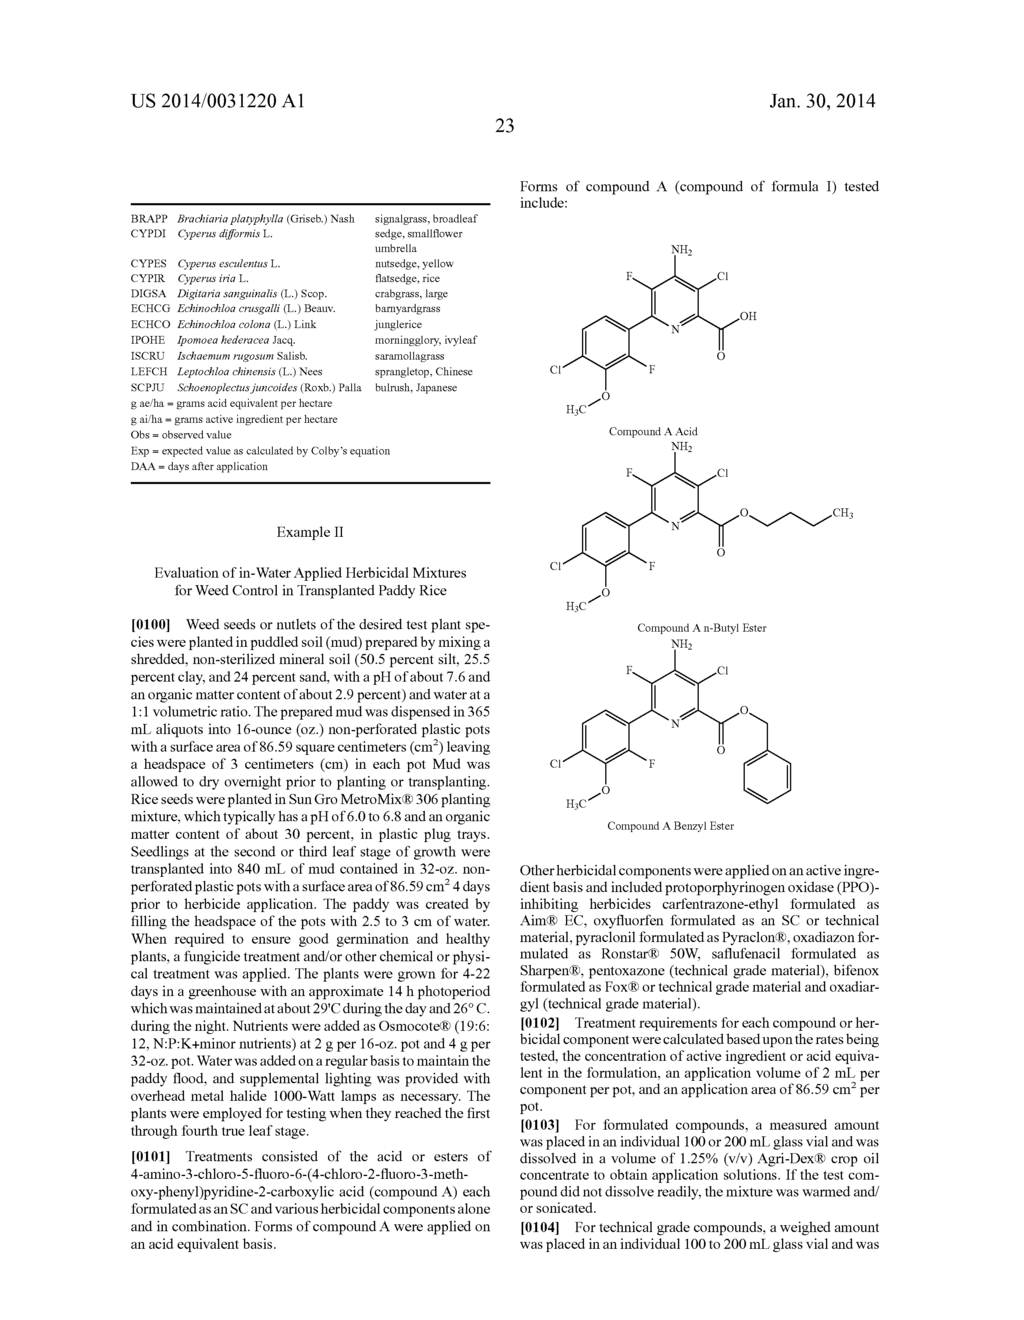 HERBICIDAL COMPOSITIONS COMPRISING     4-AMINO-3-CHLORO-5-FLUORO-6-(4-CHLORO-2-FLUORO-3-METHOXYPHENYL)     PYRIDINE-2-CARBOXYLIC ACID OR A DERIVATIVE THEREOF AND A     PROTOPORPHYRINOGEN OXIDASE INHIBITOR - diagram, schematic, and image 24